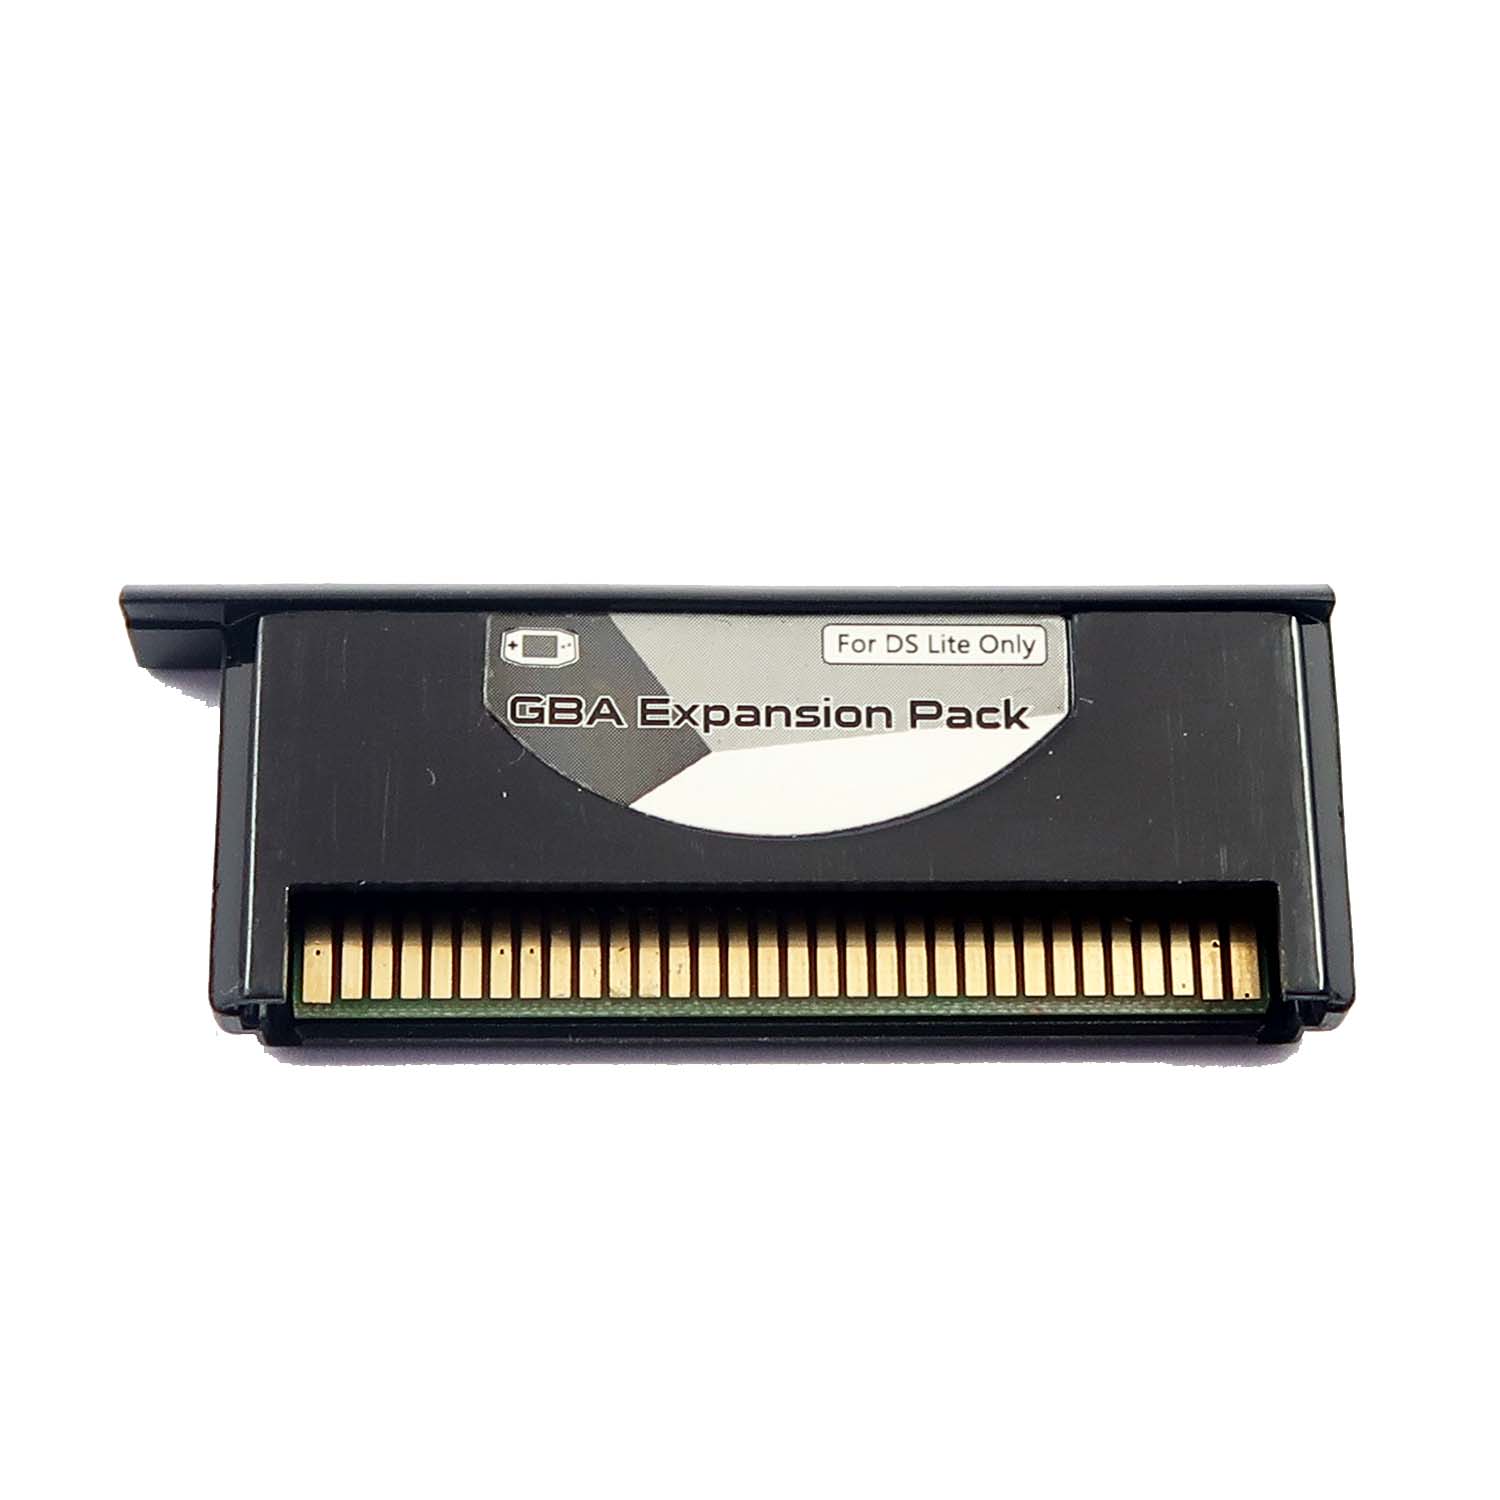 GBA Expansion Pack - Nintendo DS Lite